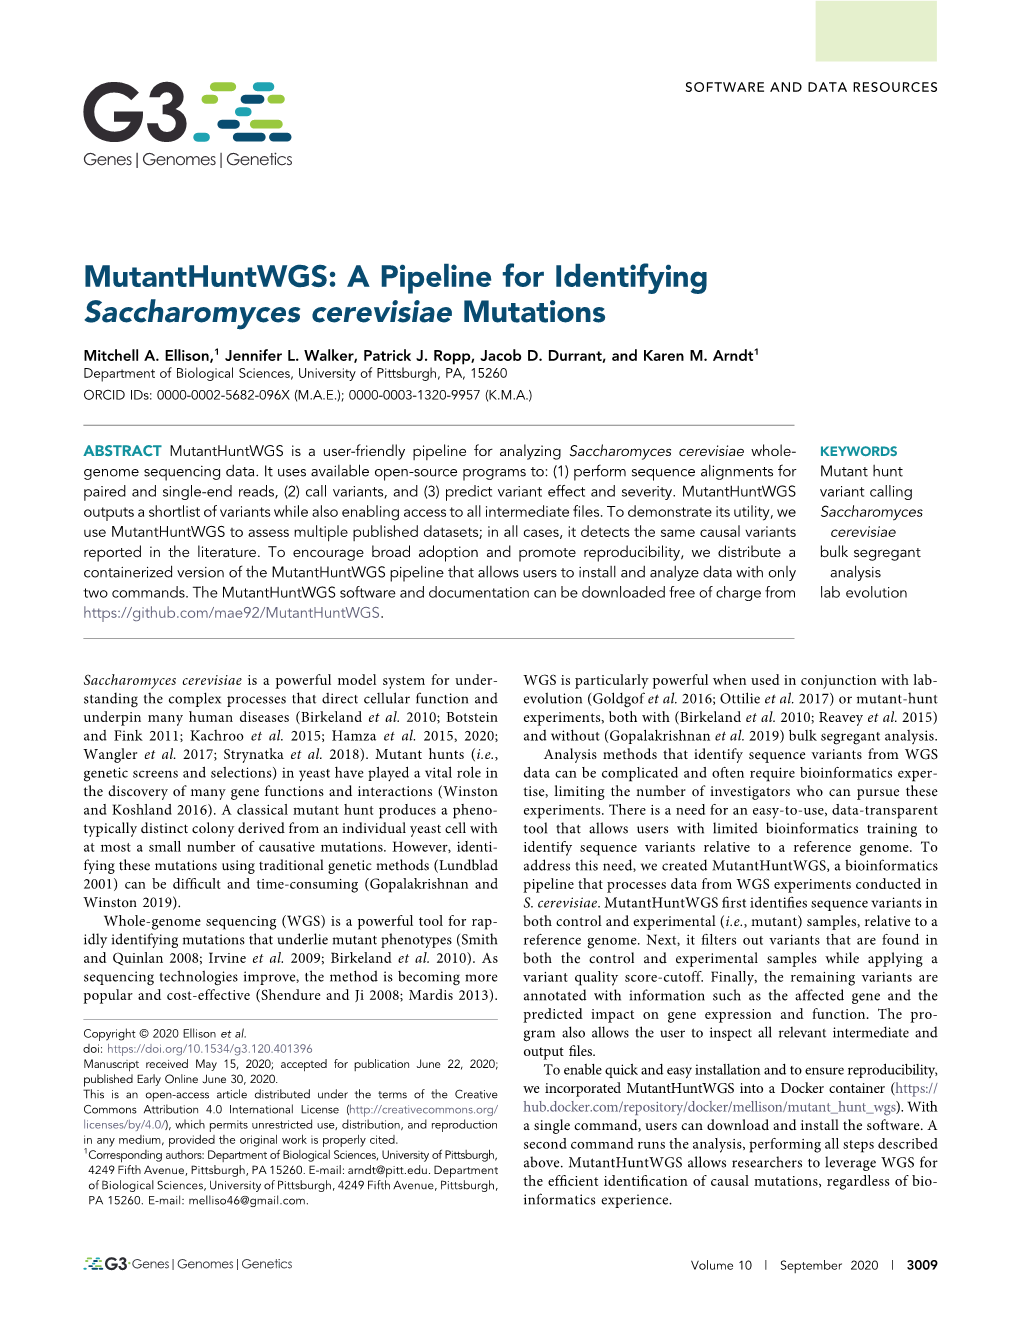 A Pipeline for Identifying Saccharomyces Cerevisiae Mutations